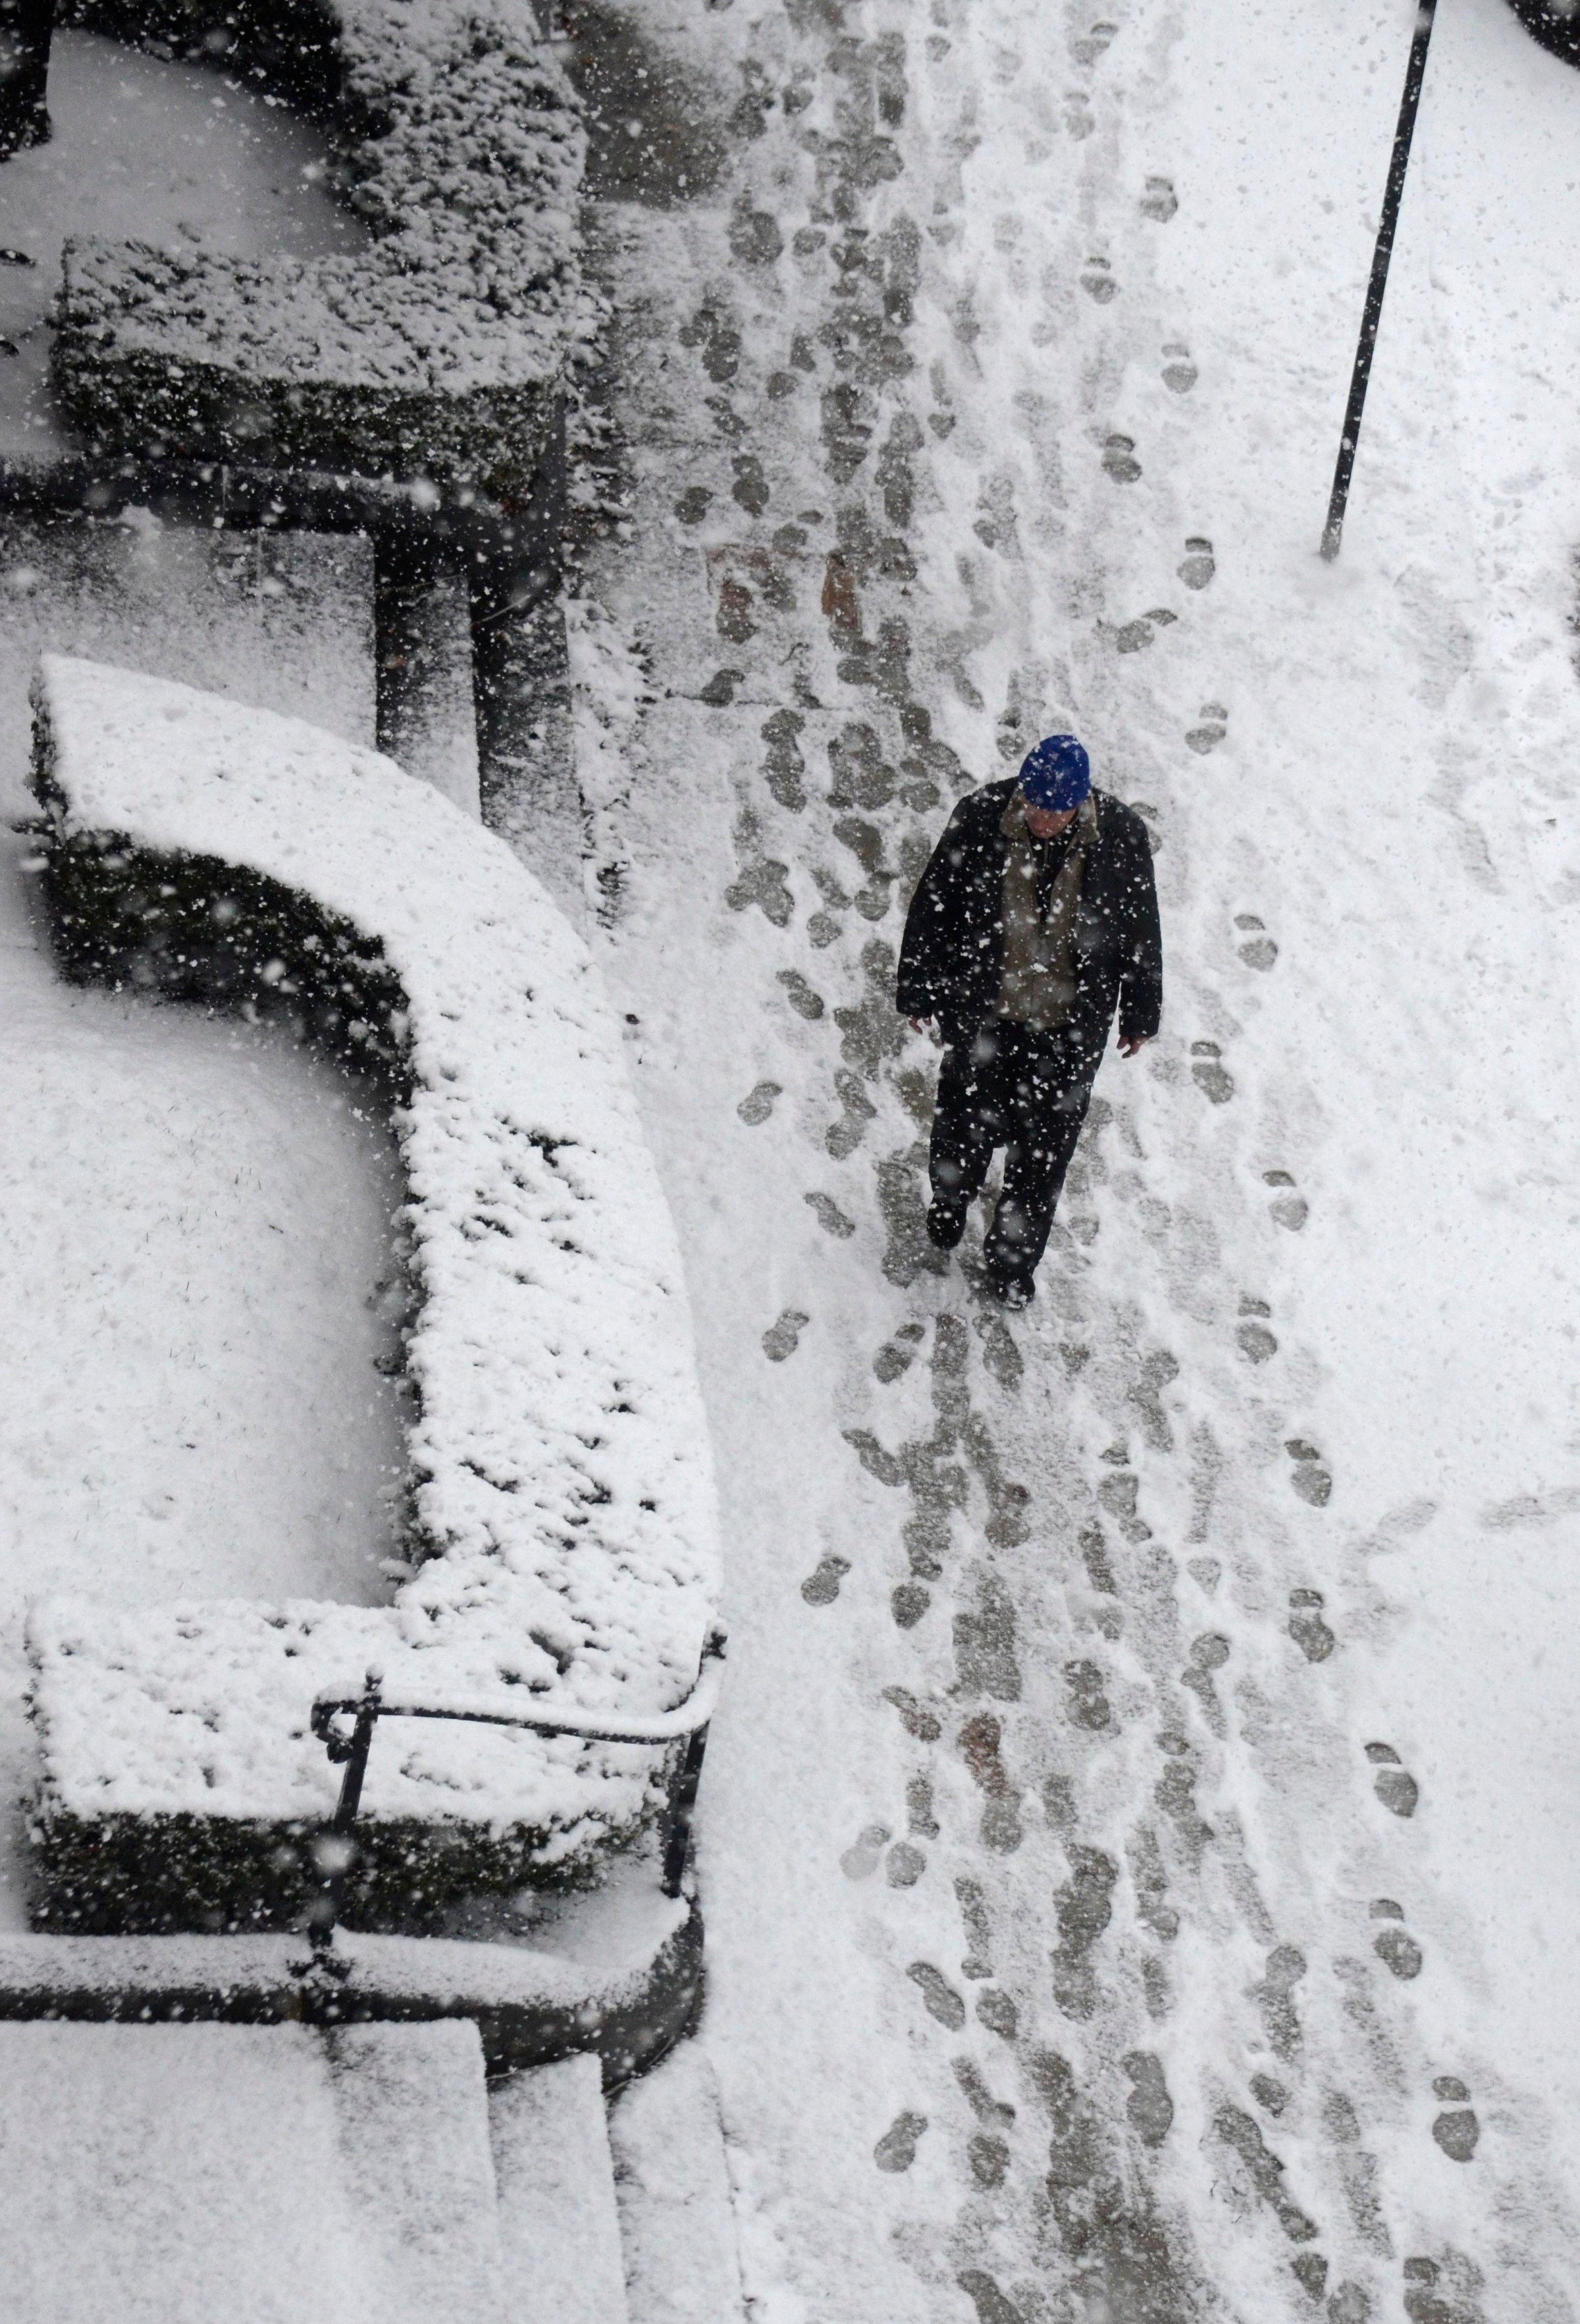 A man walks in snow in Pittsfield, Mass., as snow accumulates on the sidewalk on Dec. 10, 2014.